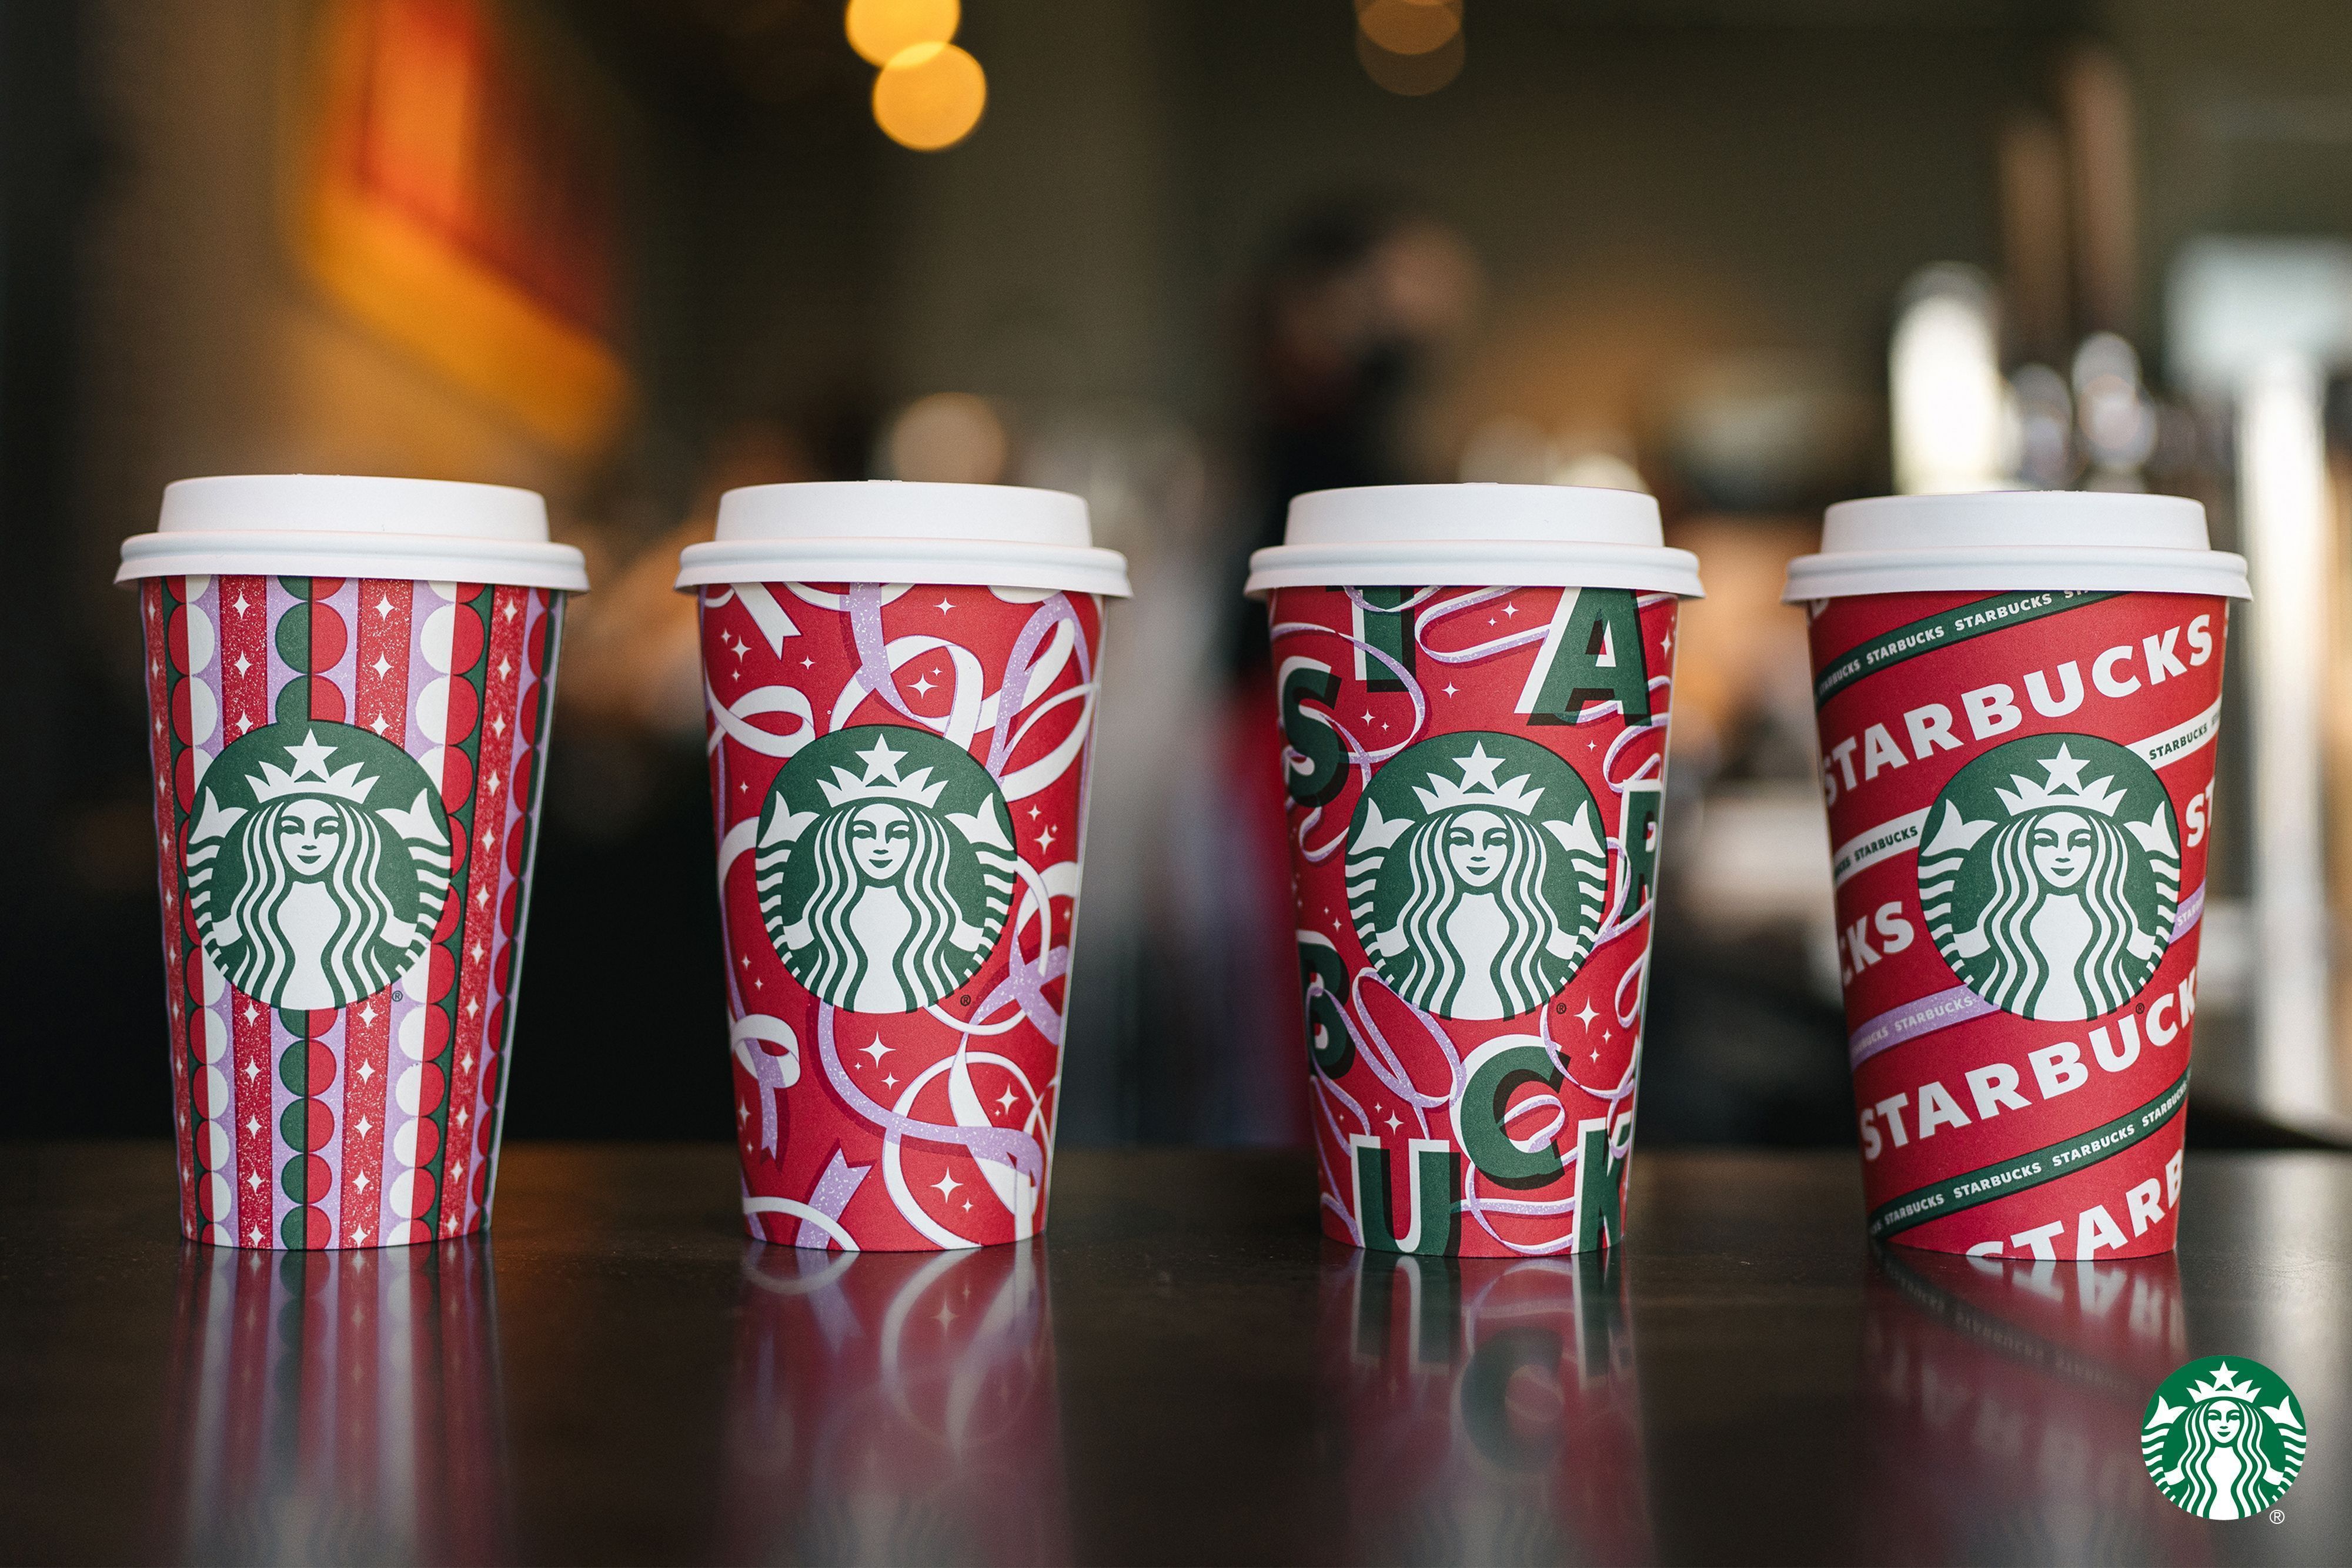 Update your virtual space with new background from Starbucks